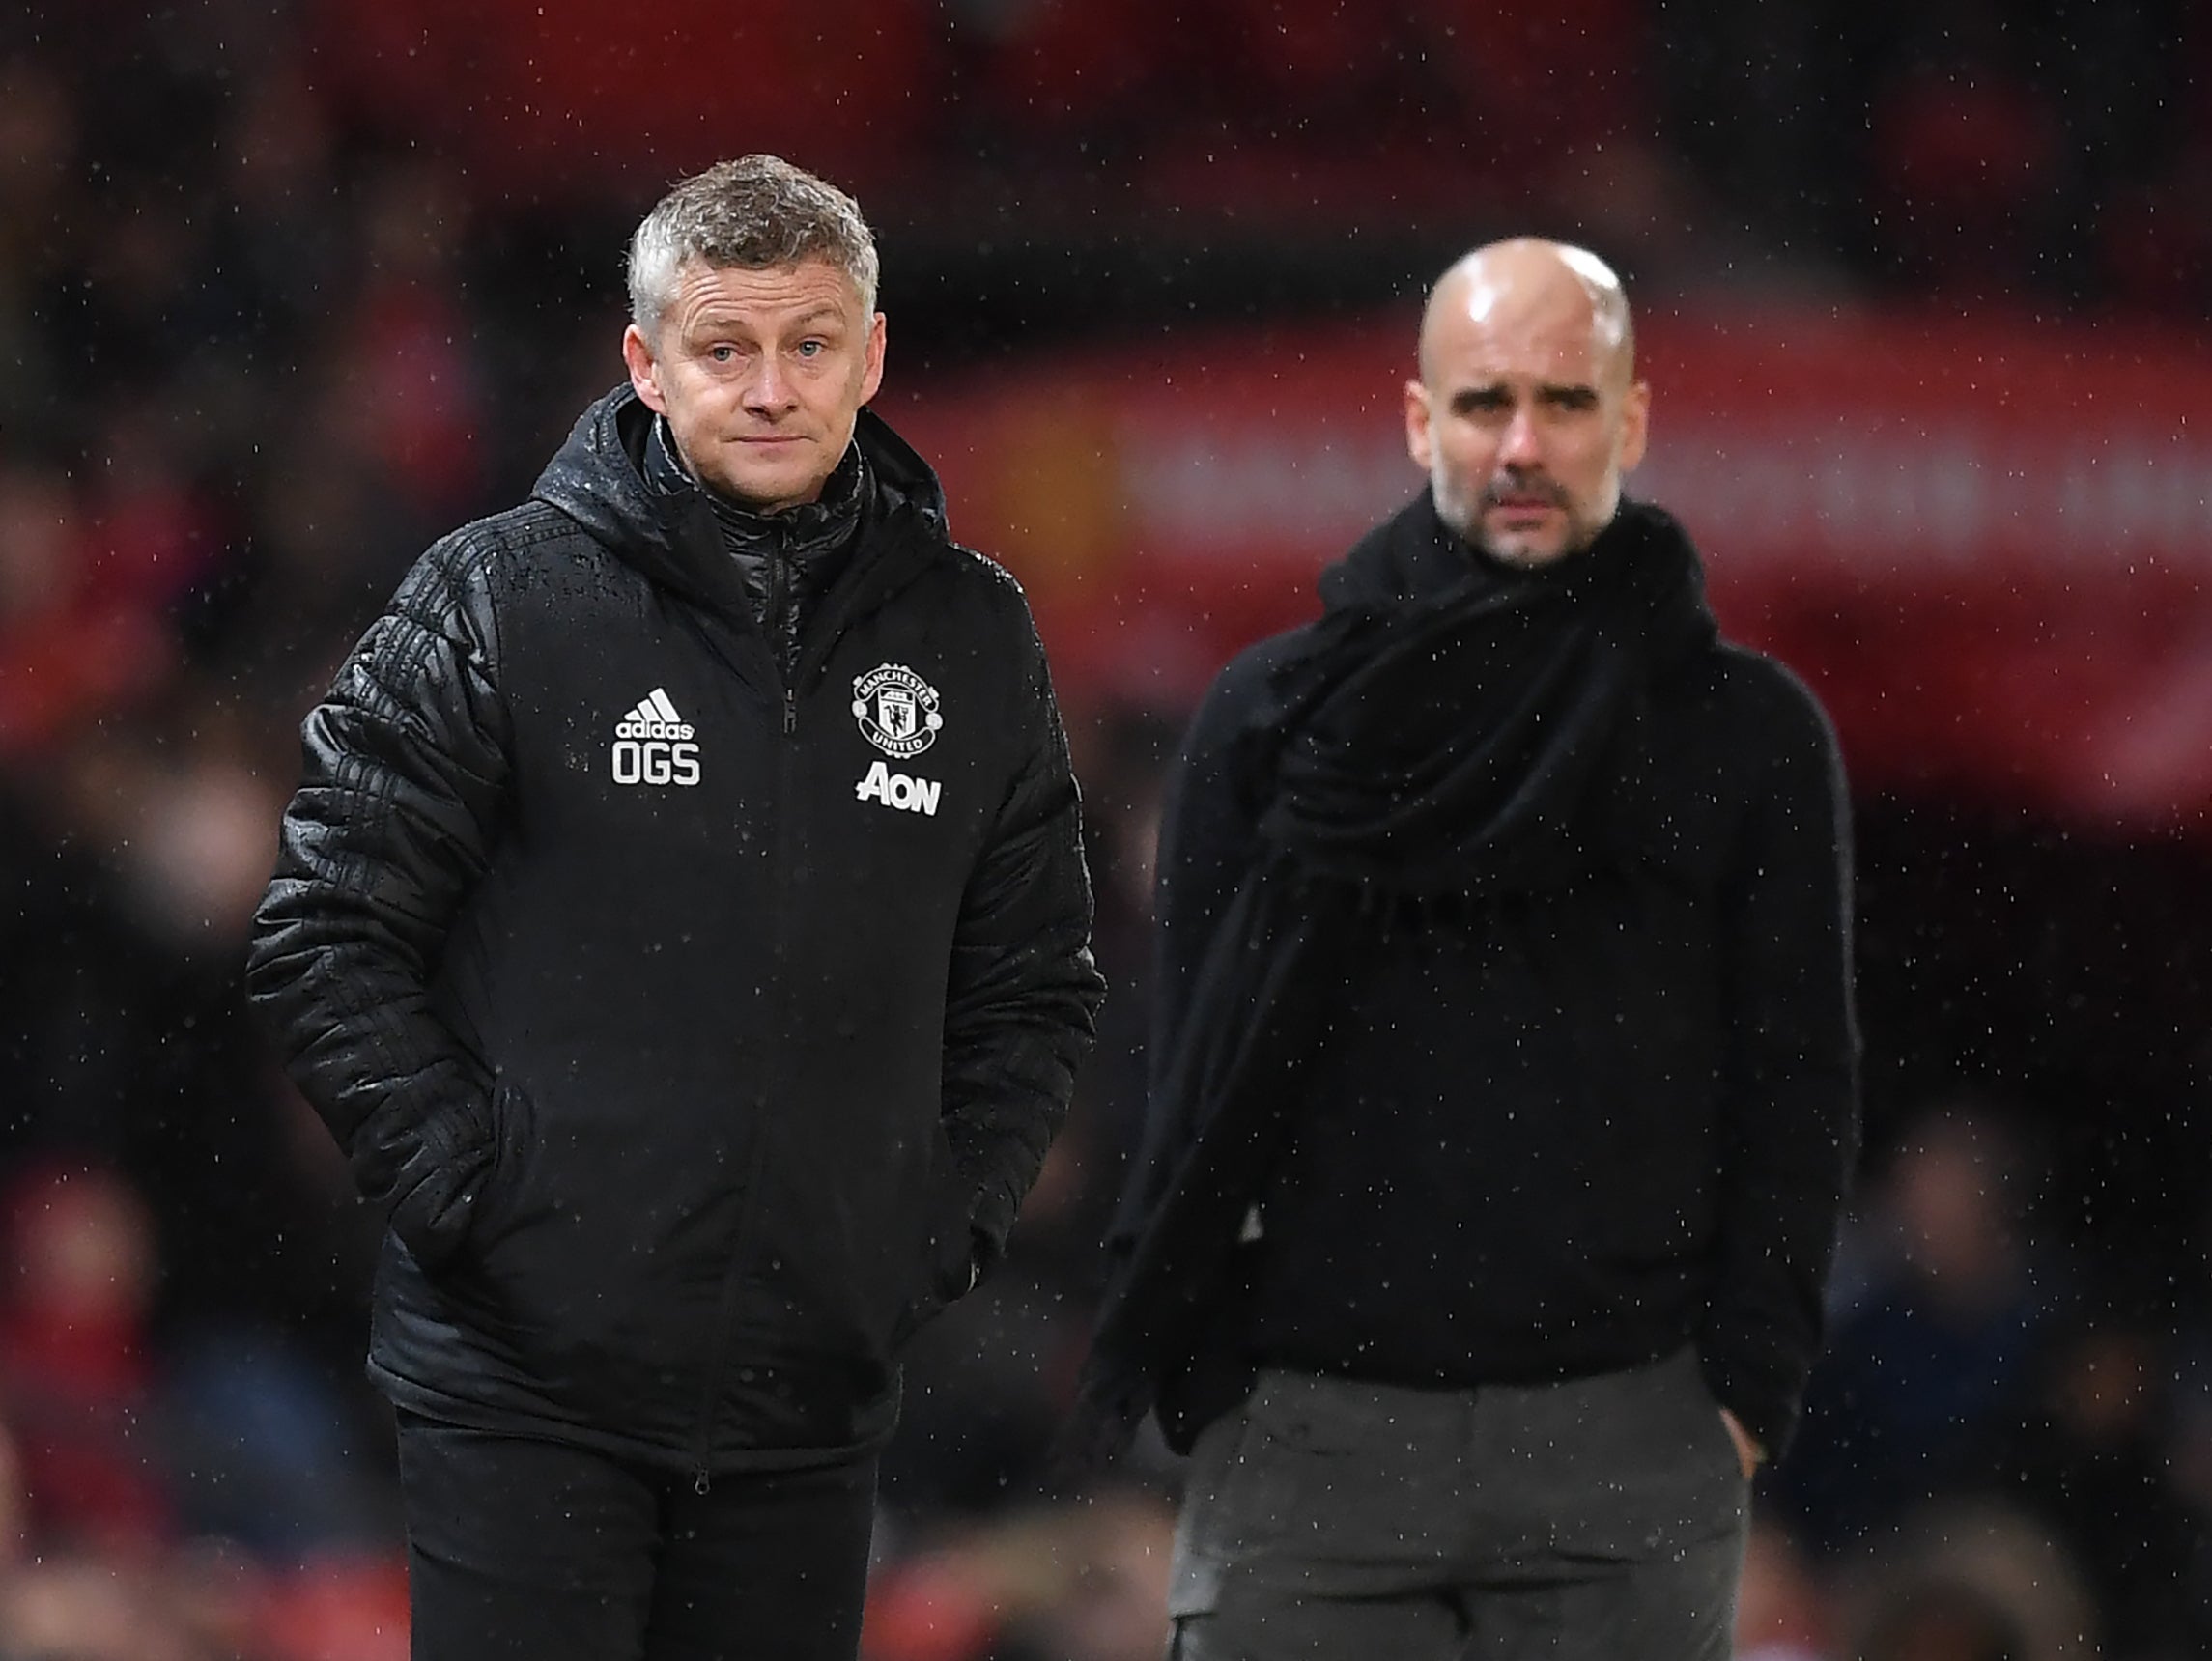 Manchester United manager Ole Gunnar Solskjaer and City boss Pep Guardiola